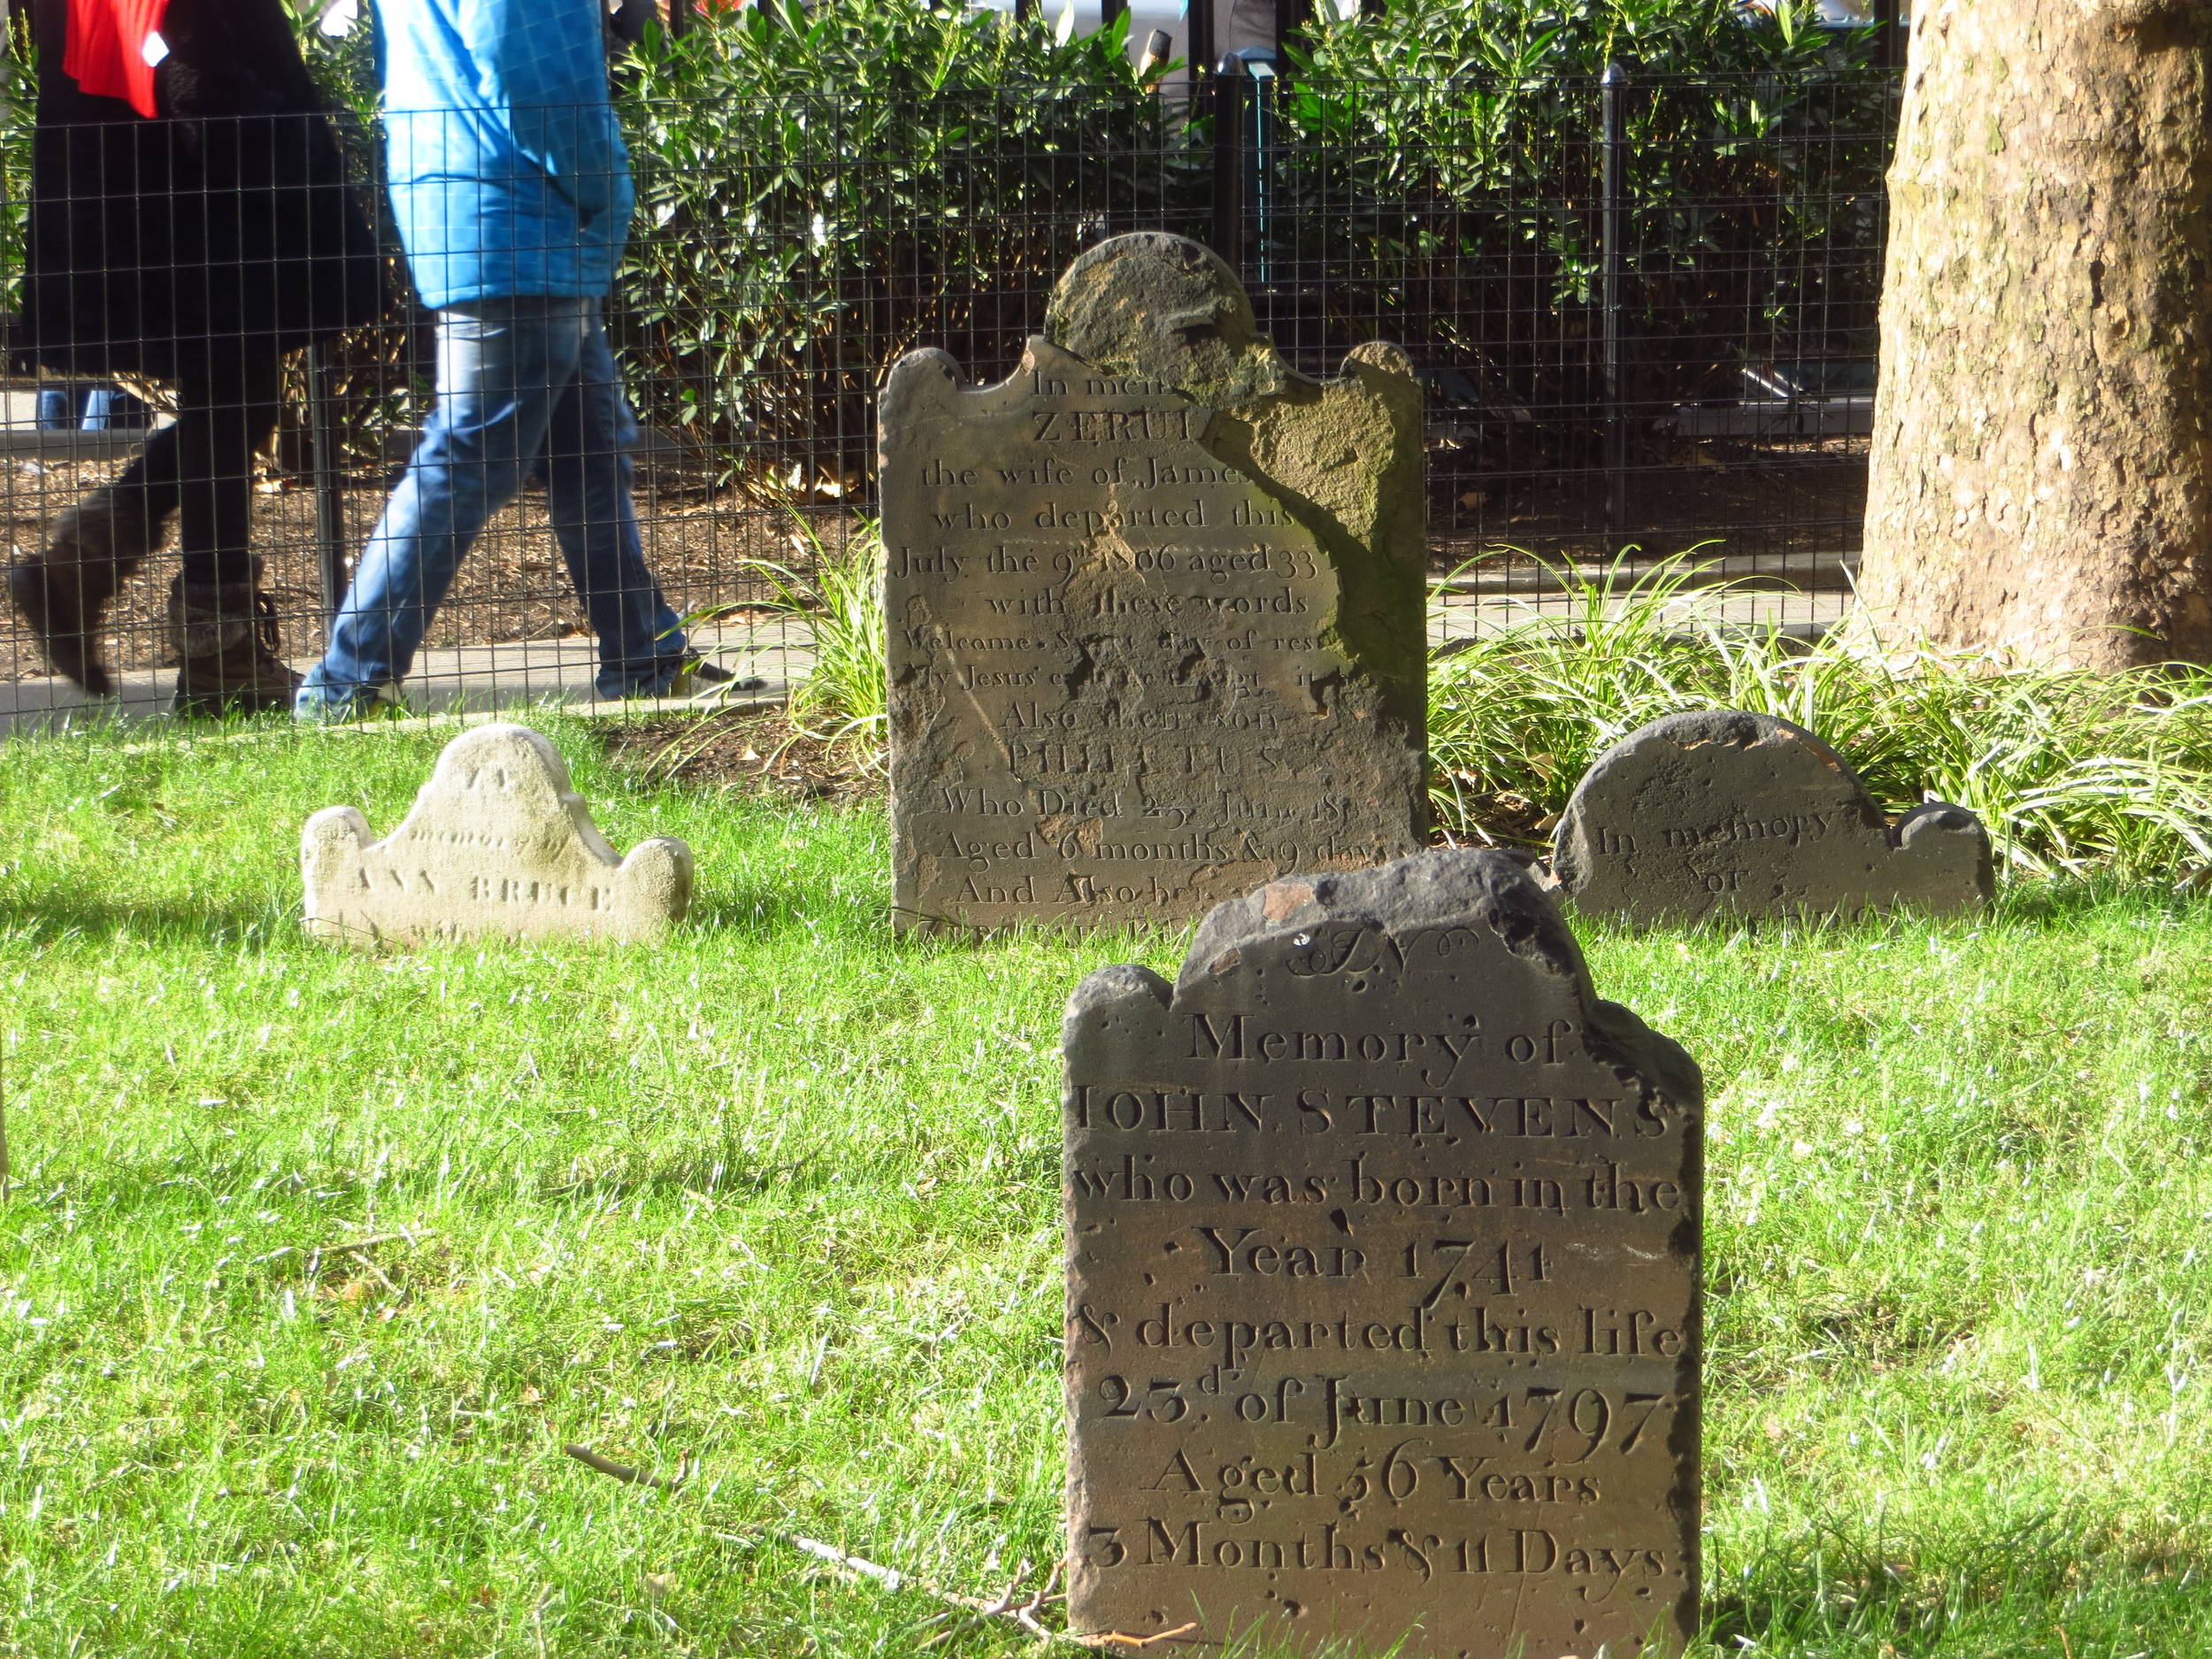 Graves in the churchyard